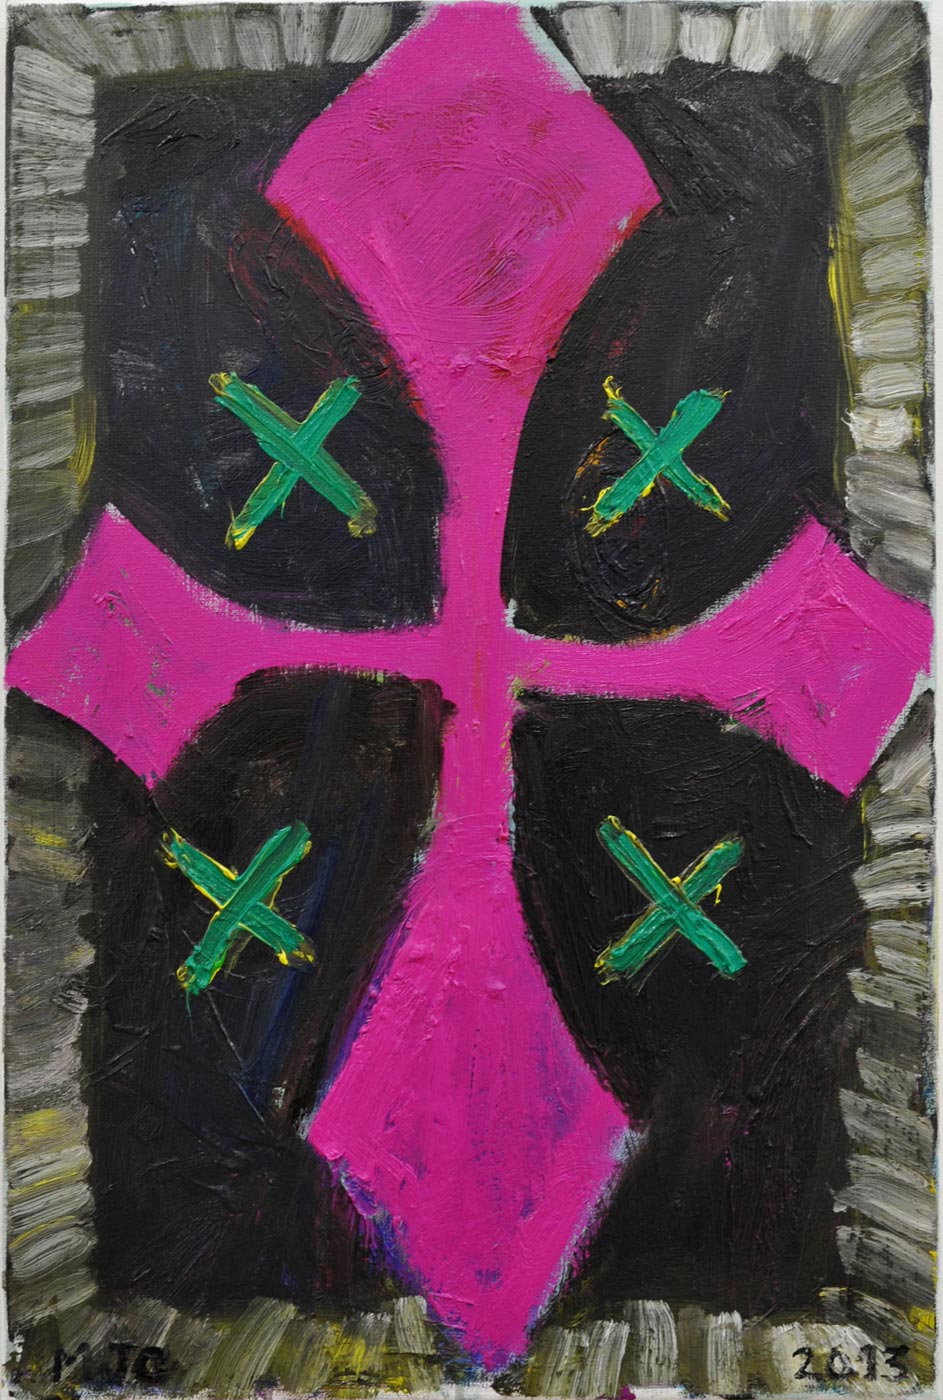 Manuel  Ocampo - Pink Cross with 4 Green X's, 2013